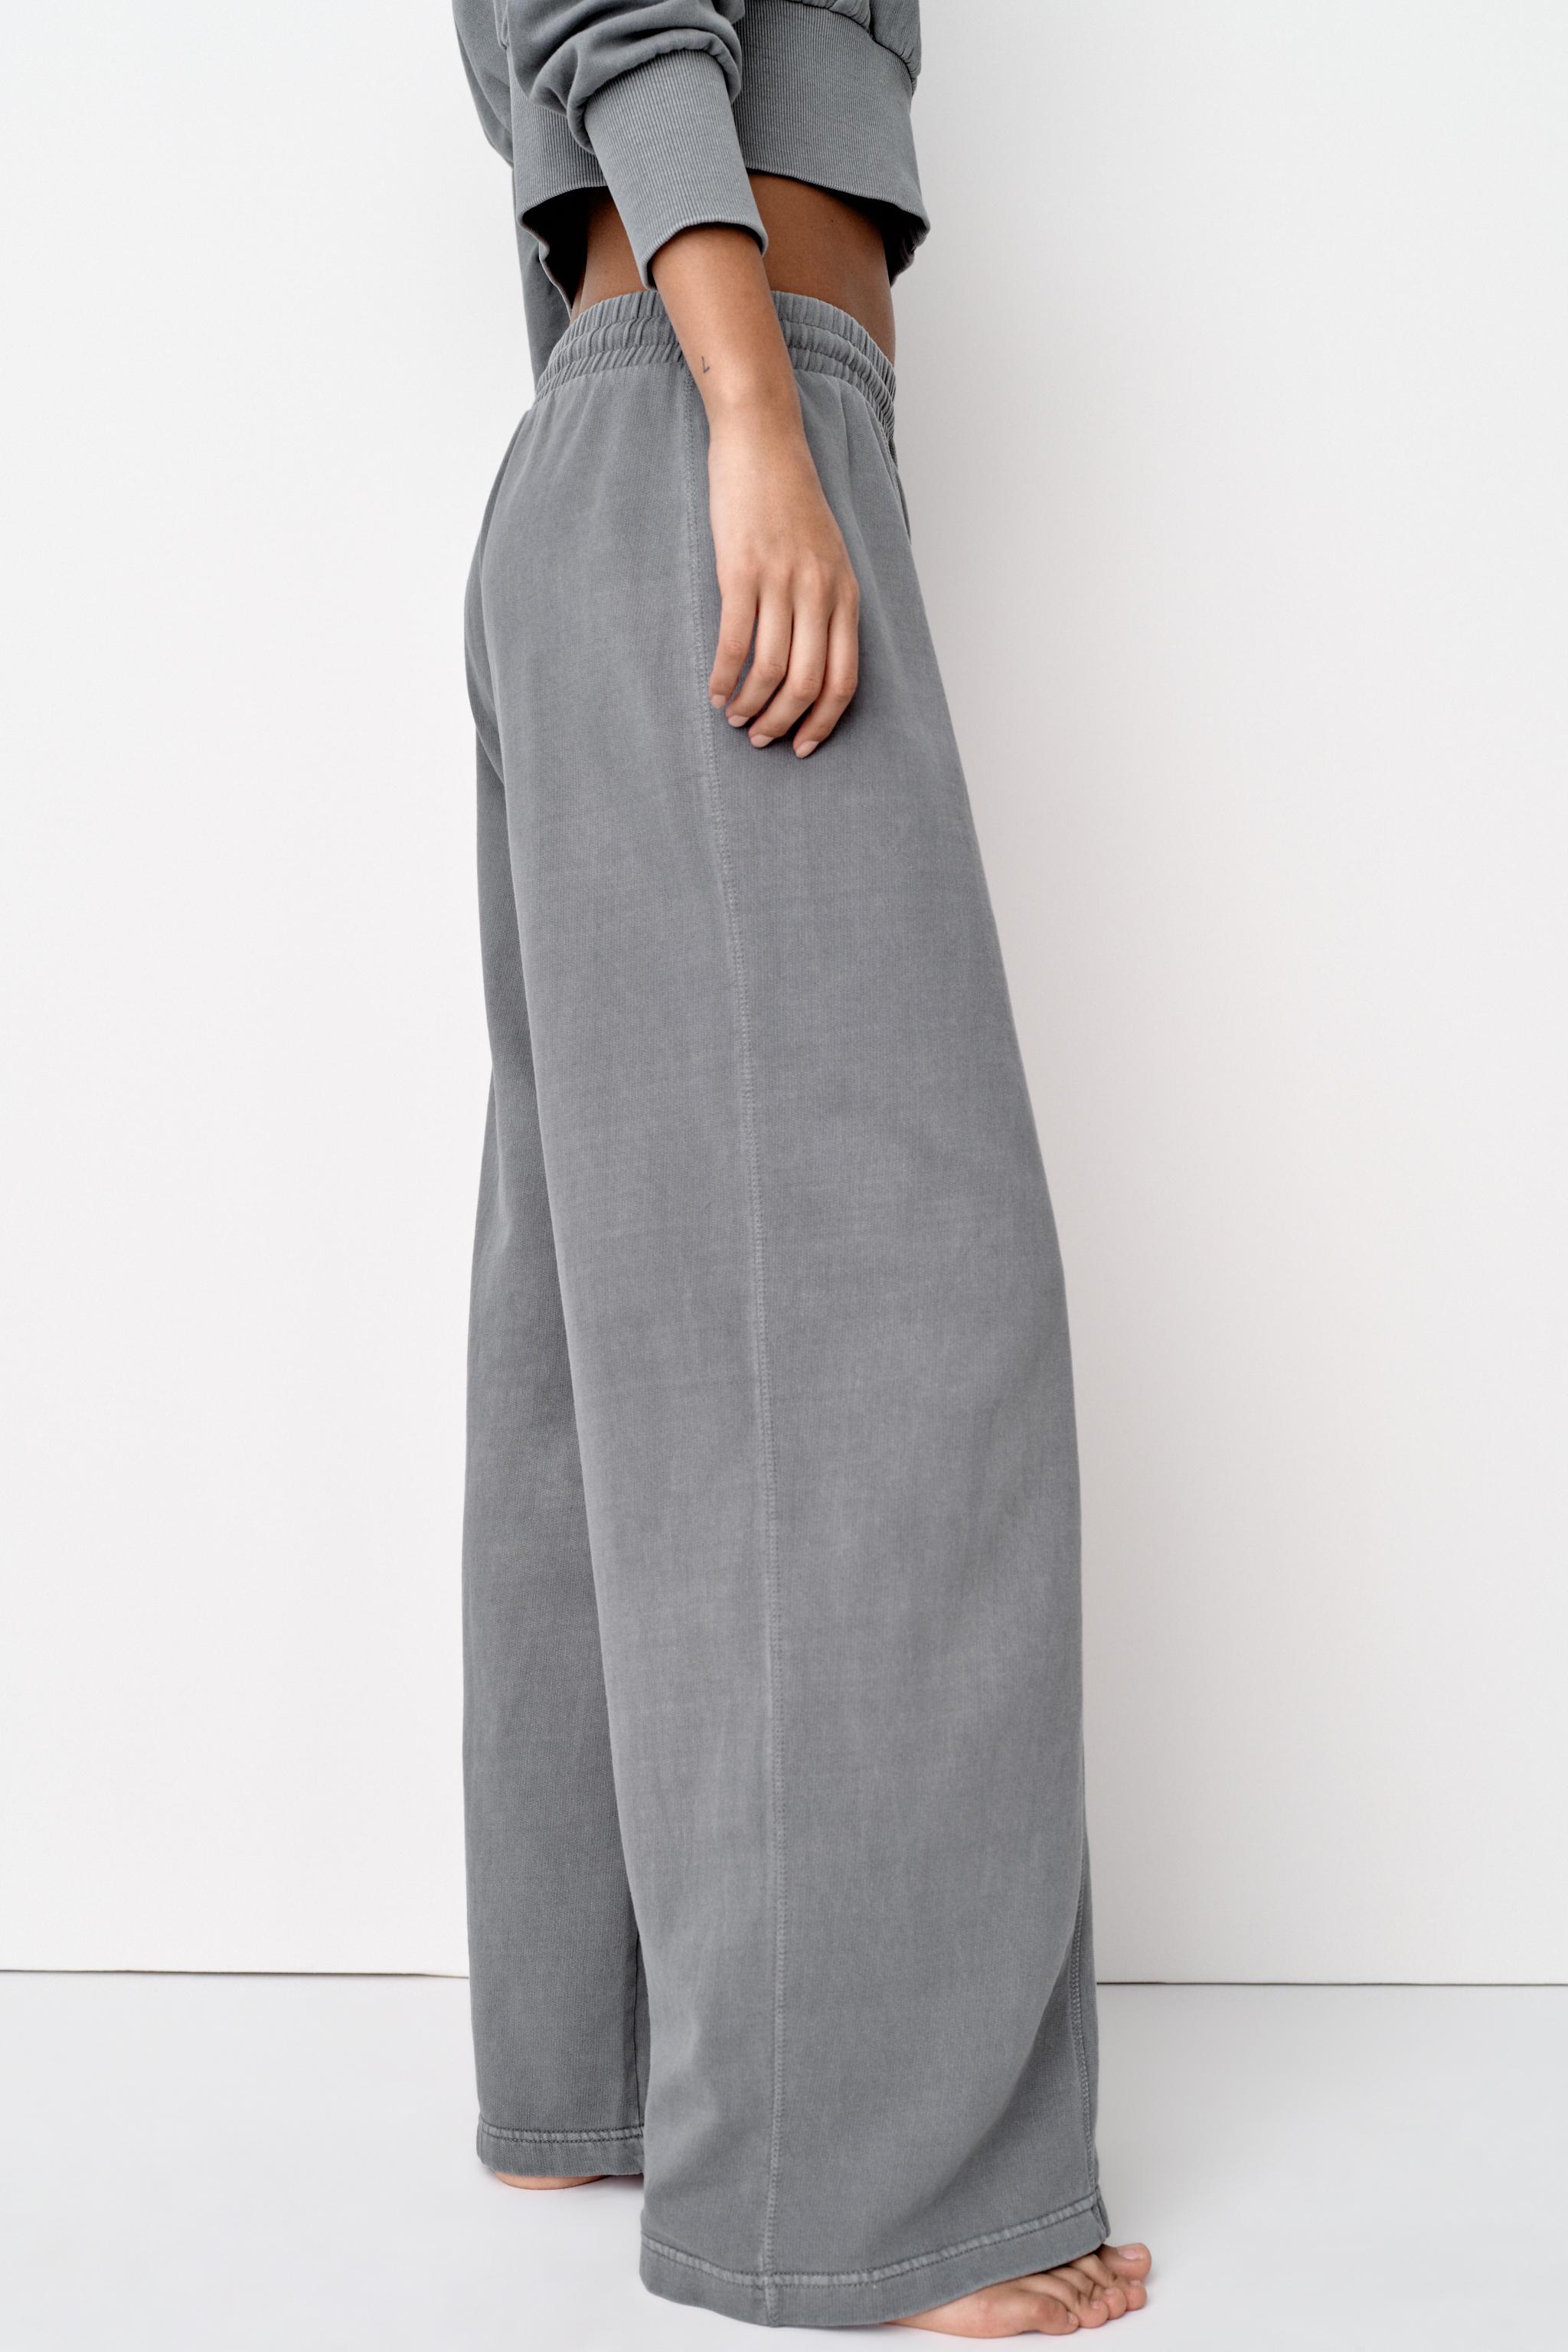 Pants with a high waist with adjustable elastic drawstring waistband.  Straight leg and pronounced seams.